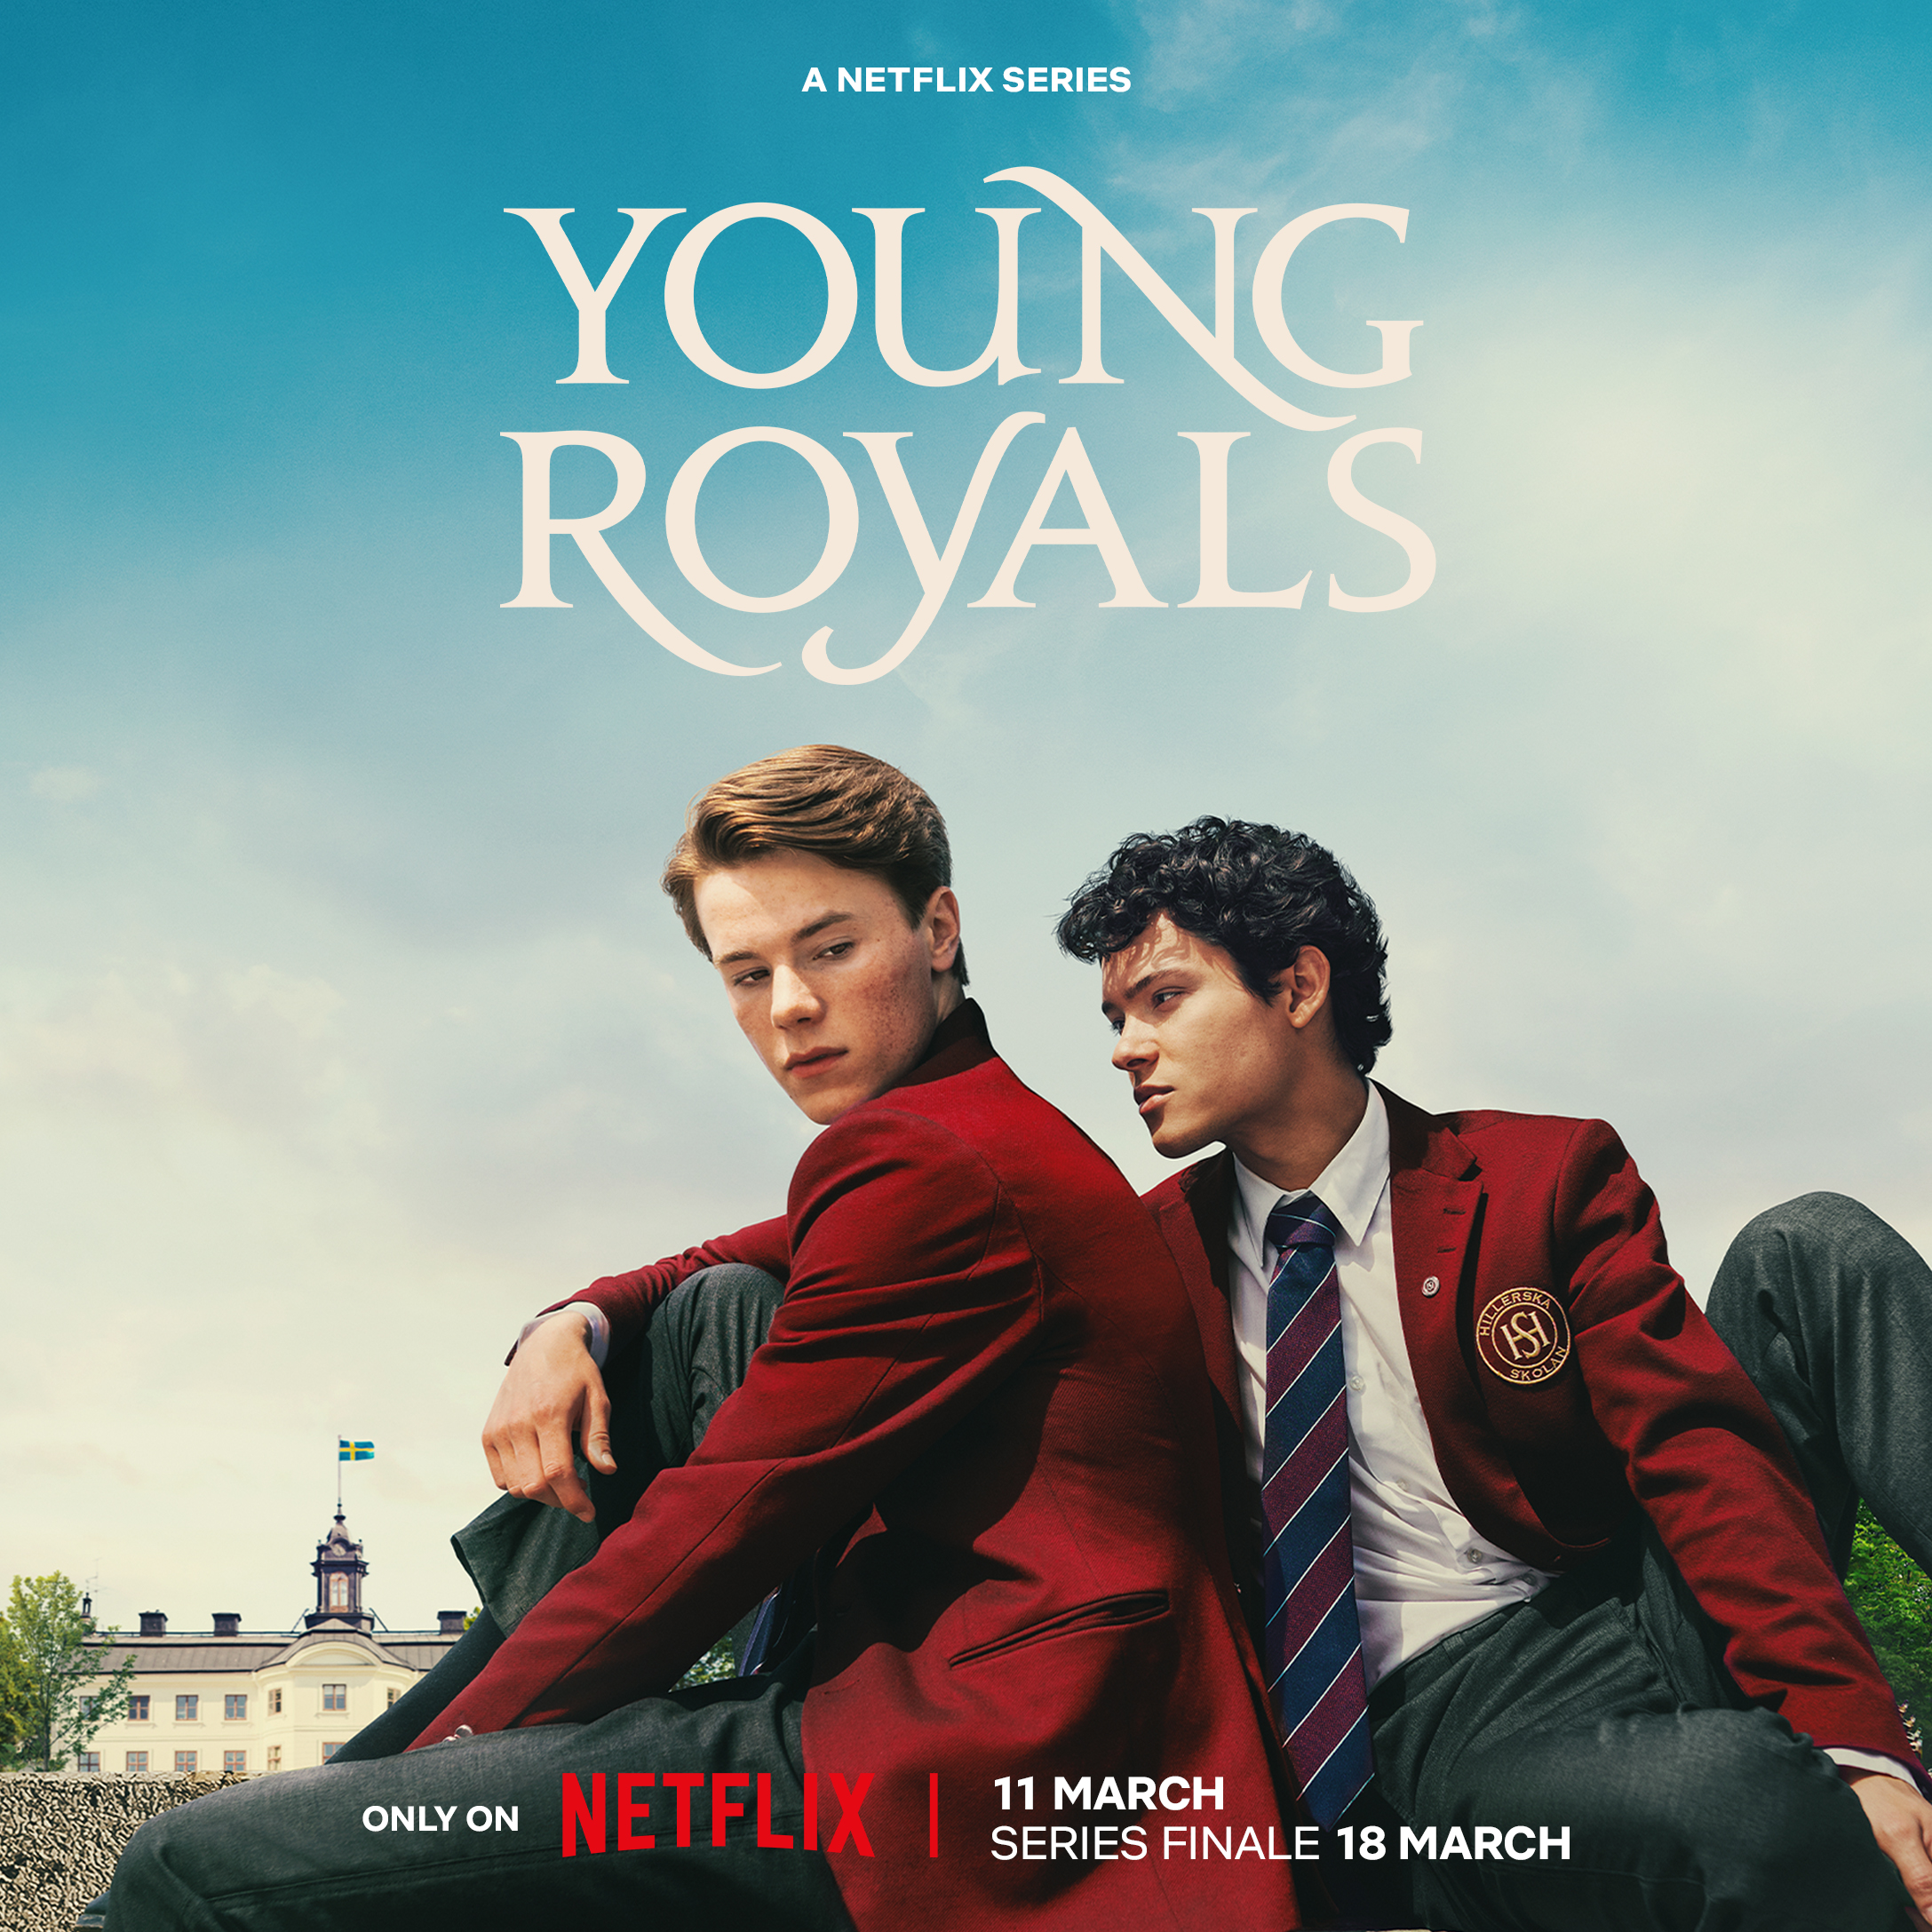 https://static.wikia.nocookie.net/youngroyals/images/7/7e/Young_Royals_S3_Poster.jpg/revision/latest?cb=20240124160512